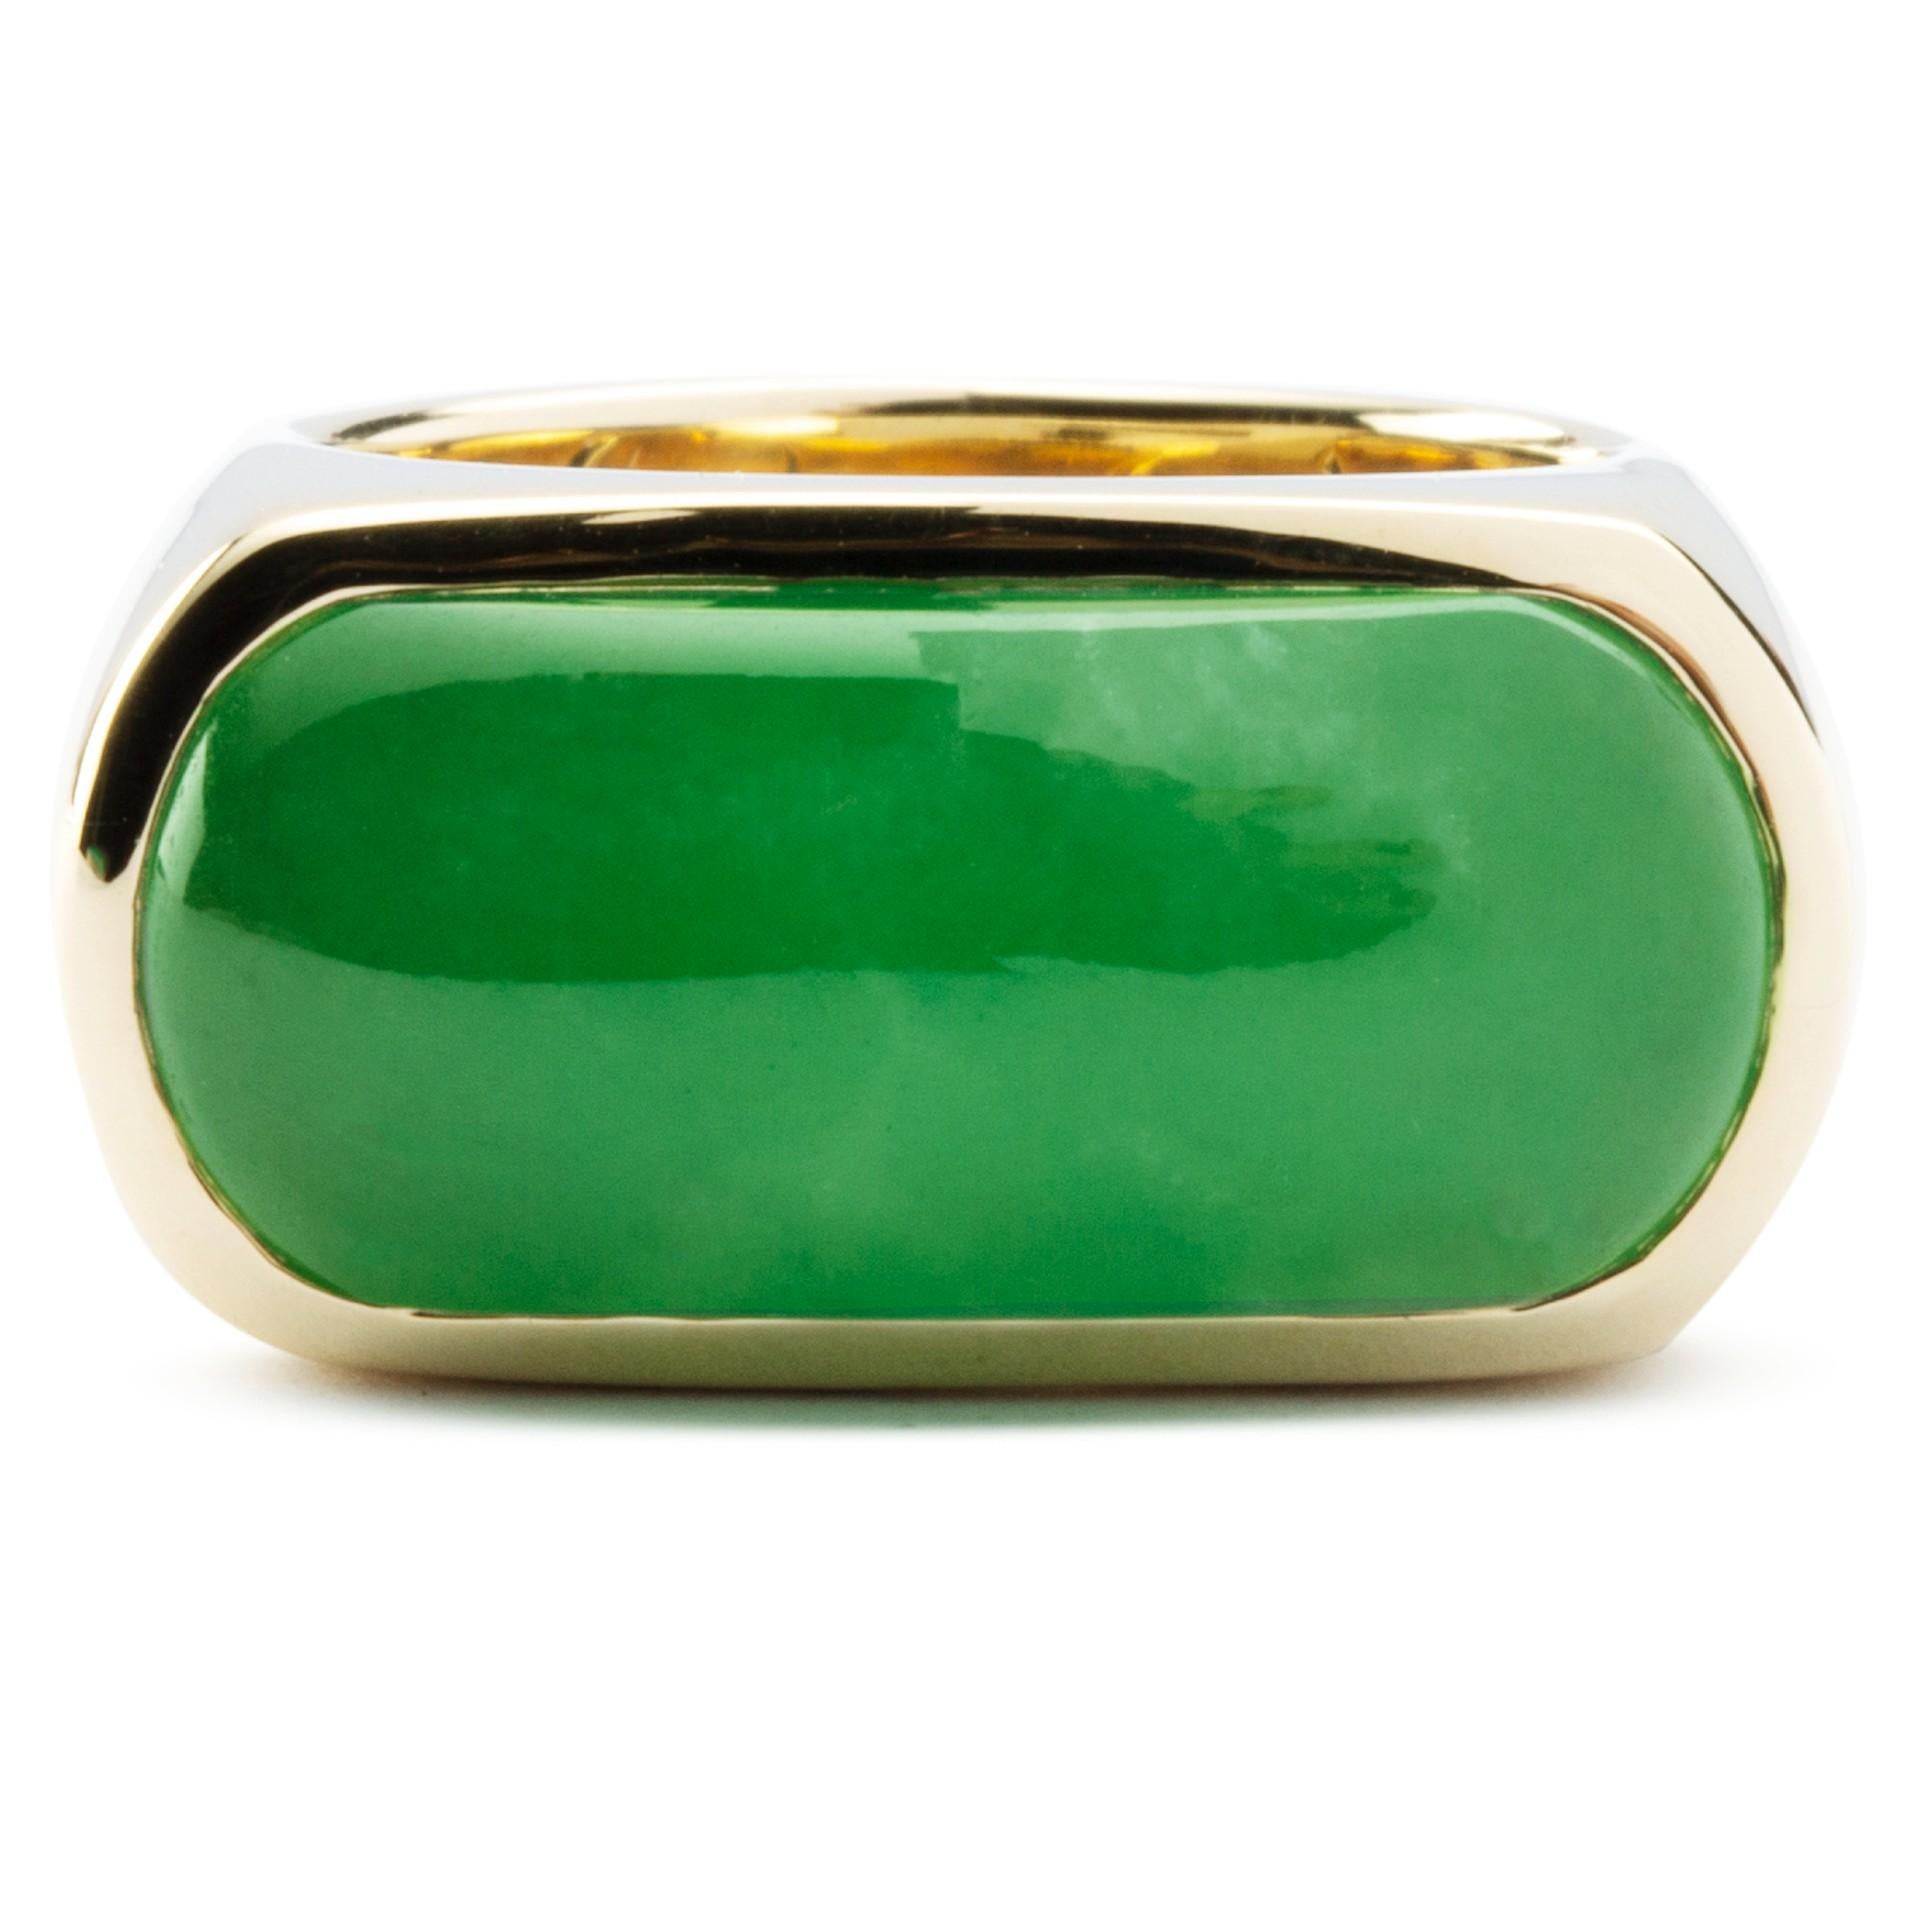 Alex Jona design collection, hand crafted in Italy, 18 karat yellow gold ring set with an oblong Burmese Jade weighing 9.20 carats. Ring size US 6.5- EU 12, can be sized to any specification. Ring Dimensions: H 0.95 in x W 0.95 in x Dm 0.63 in - H